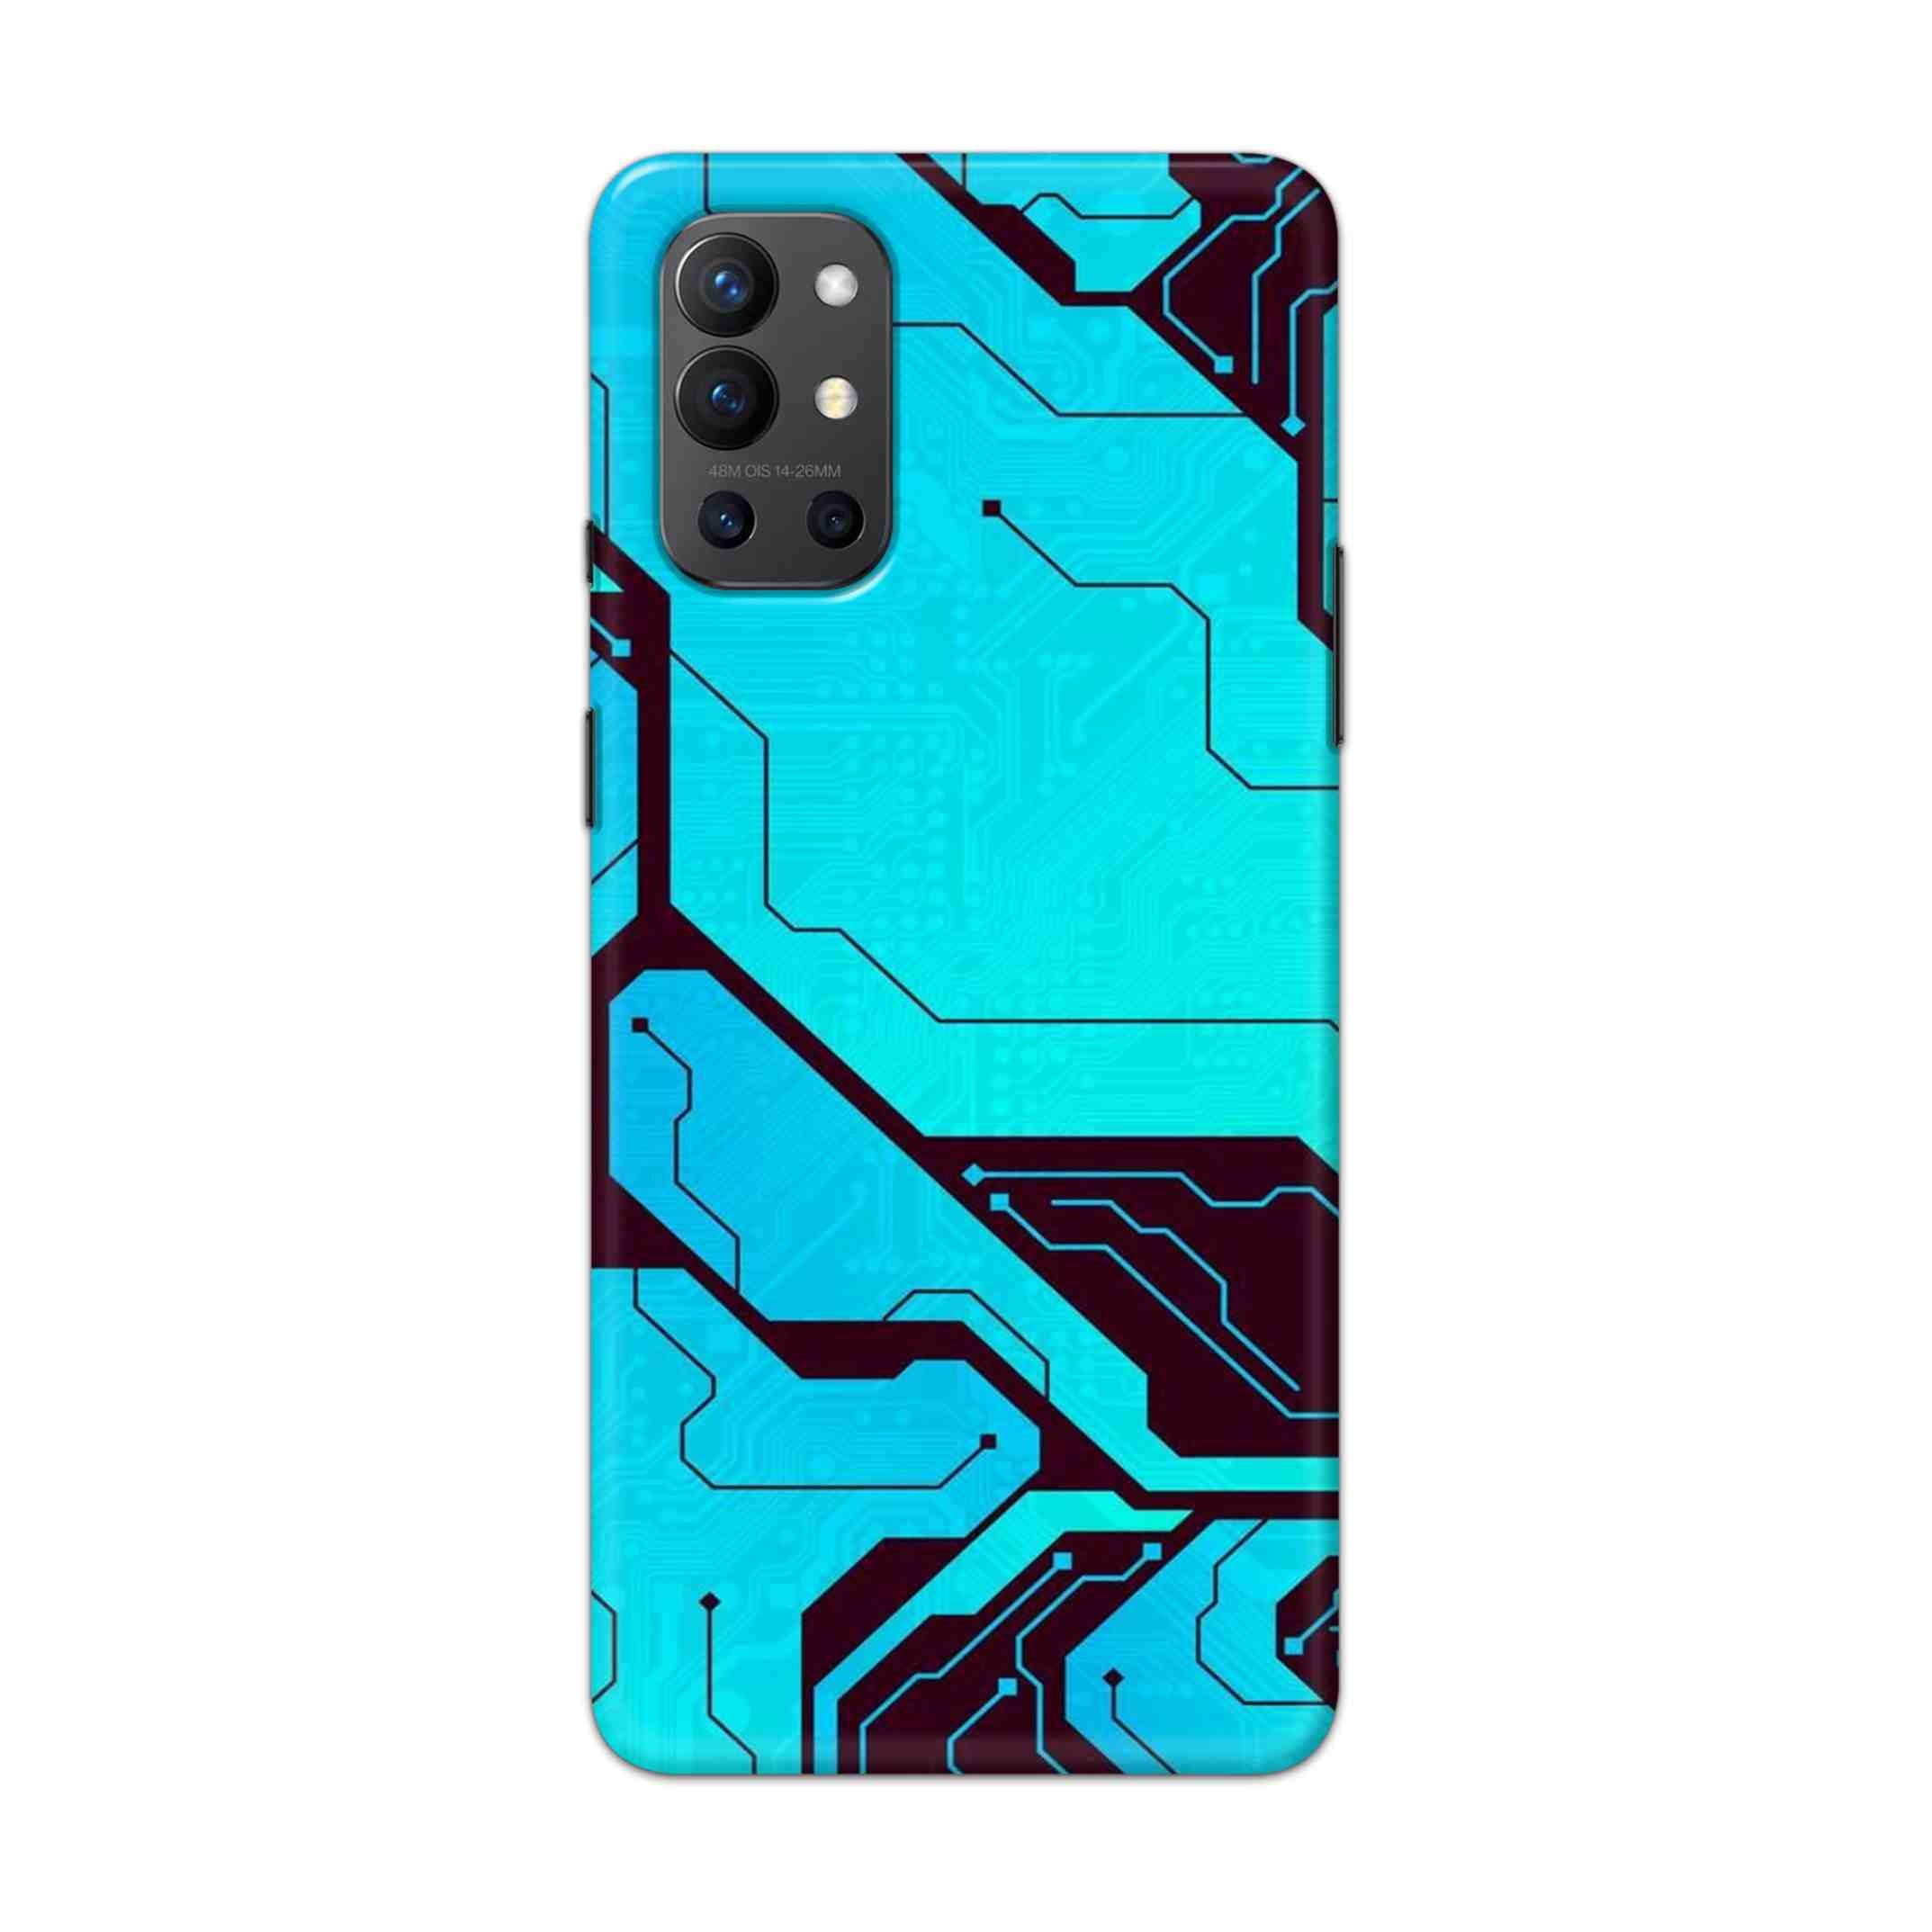 Buy Futuristic Line Hard Back Mobile Phone Case Cover For OnePlus 9R / 8T Online